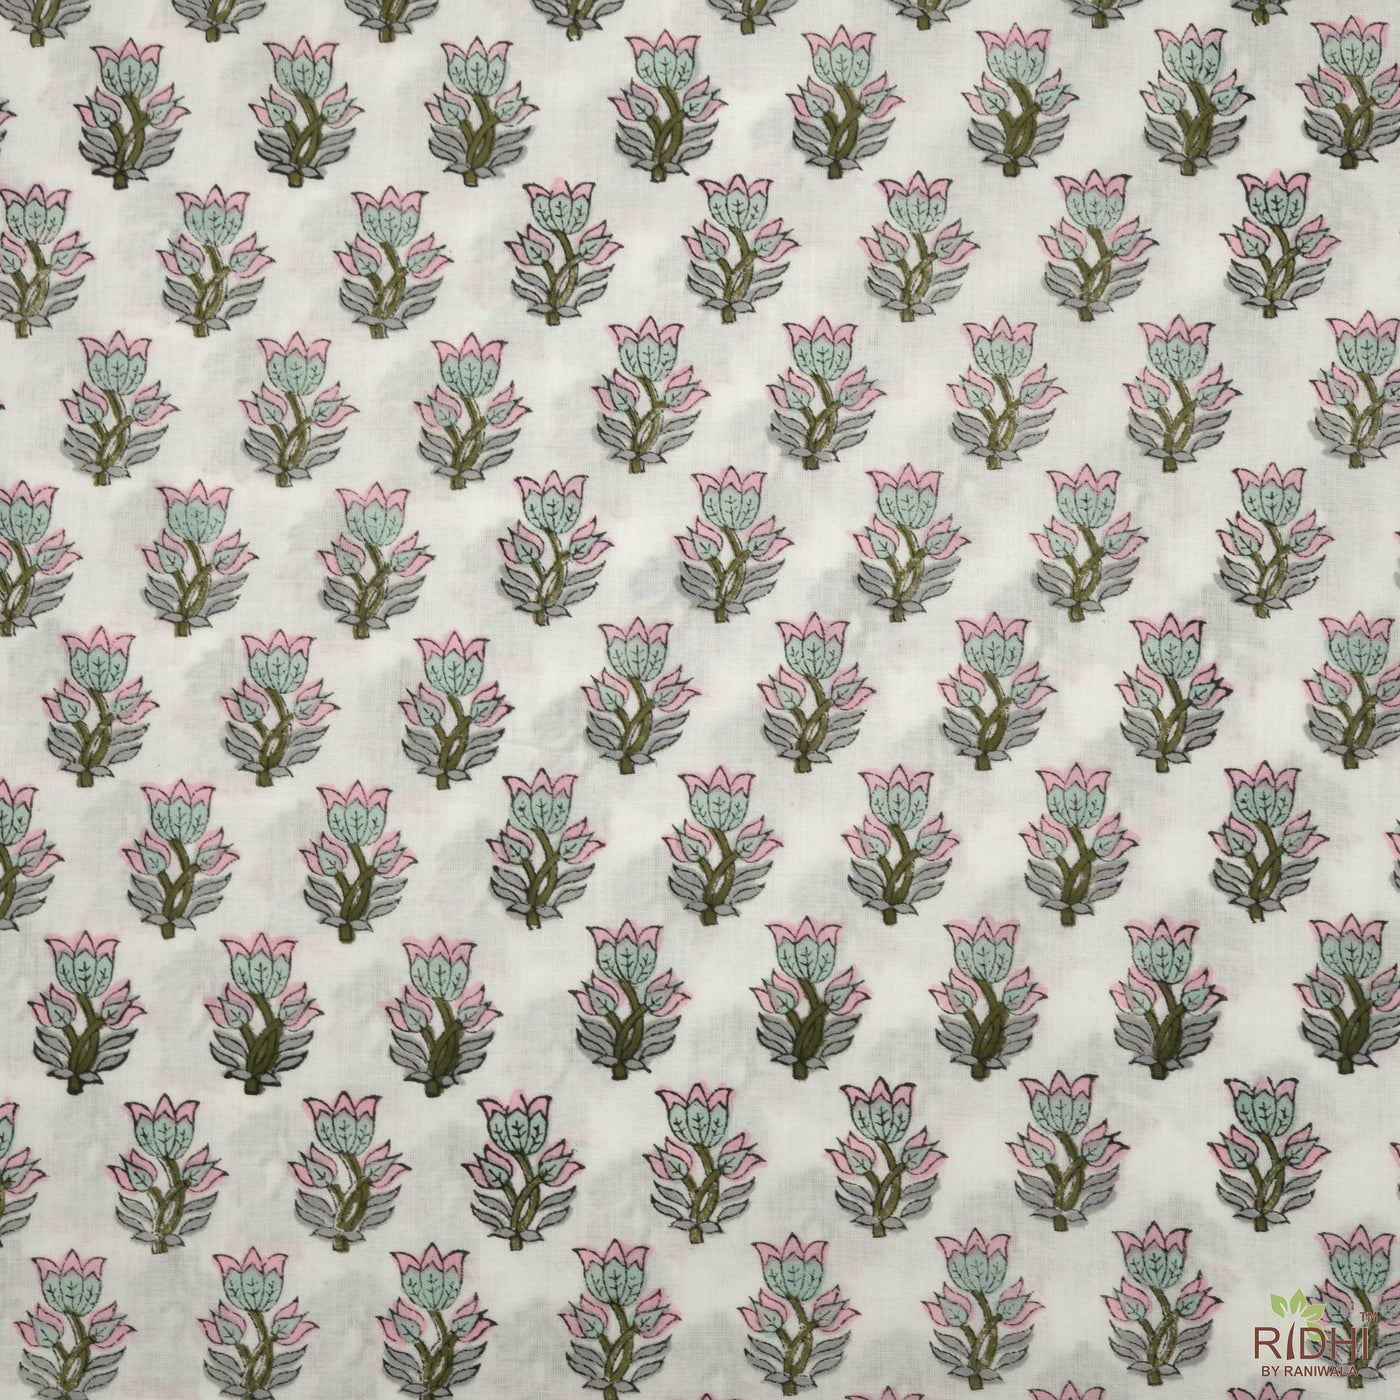 Grey, Amaranth Pink, Army Green Indian Floral Hand Block Printed 100% Pure Cotton Cloth, Fabric by the yard, Women's clothing Curtains Bags